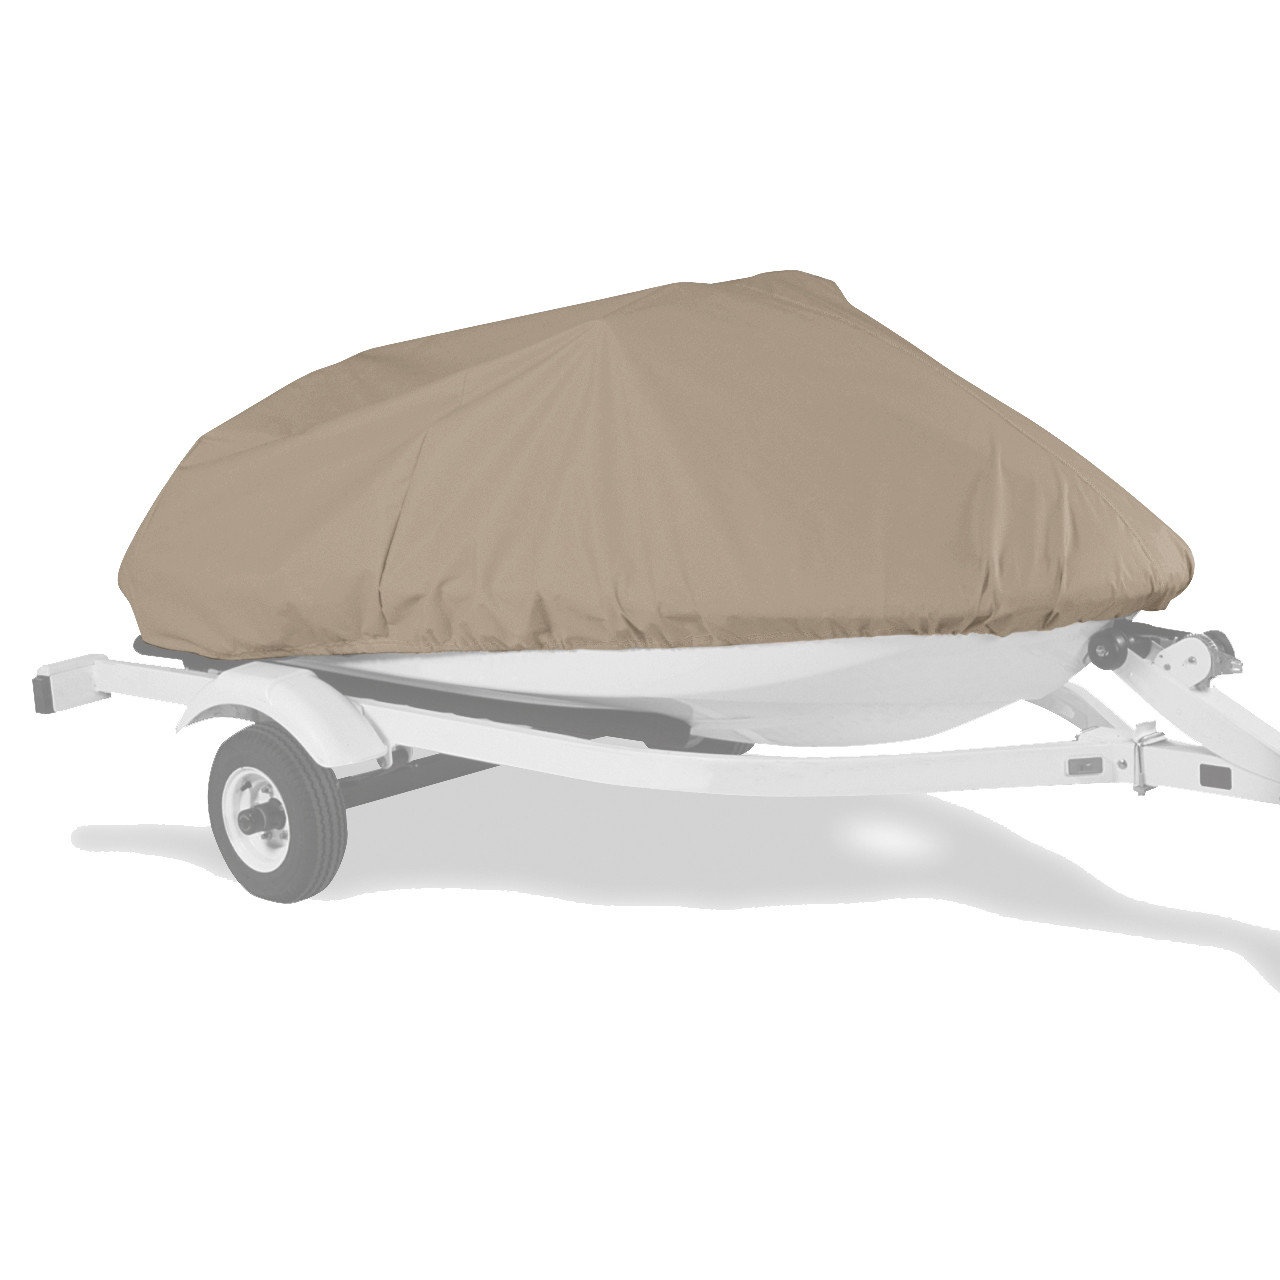 Personal Water Craft Boat Cover 11' 10" x 48" x 48" Carver 4004